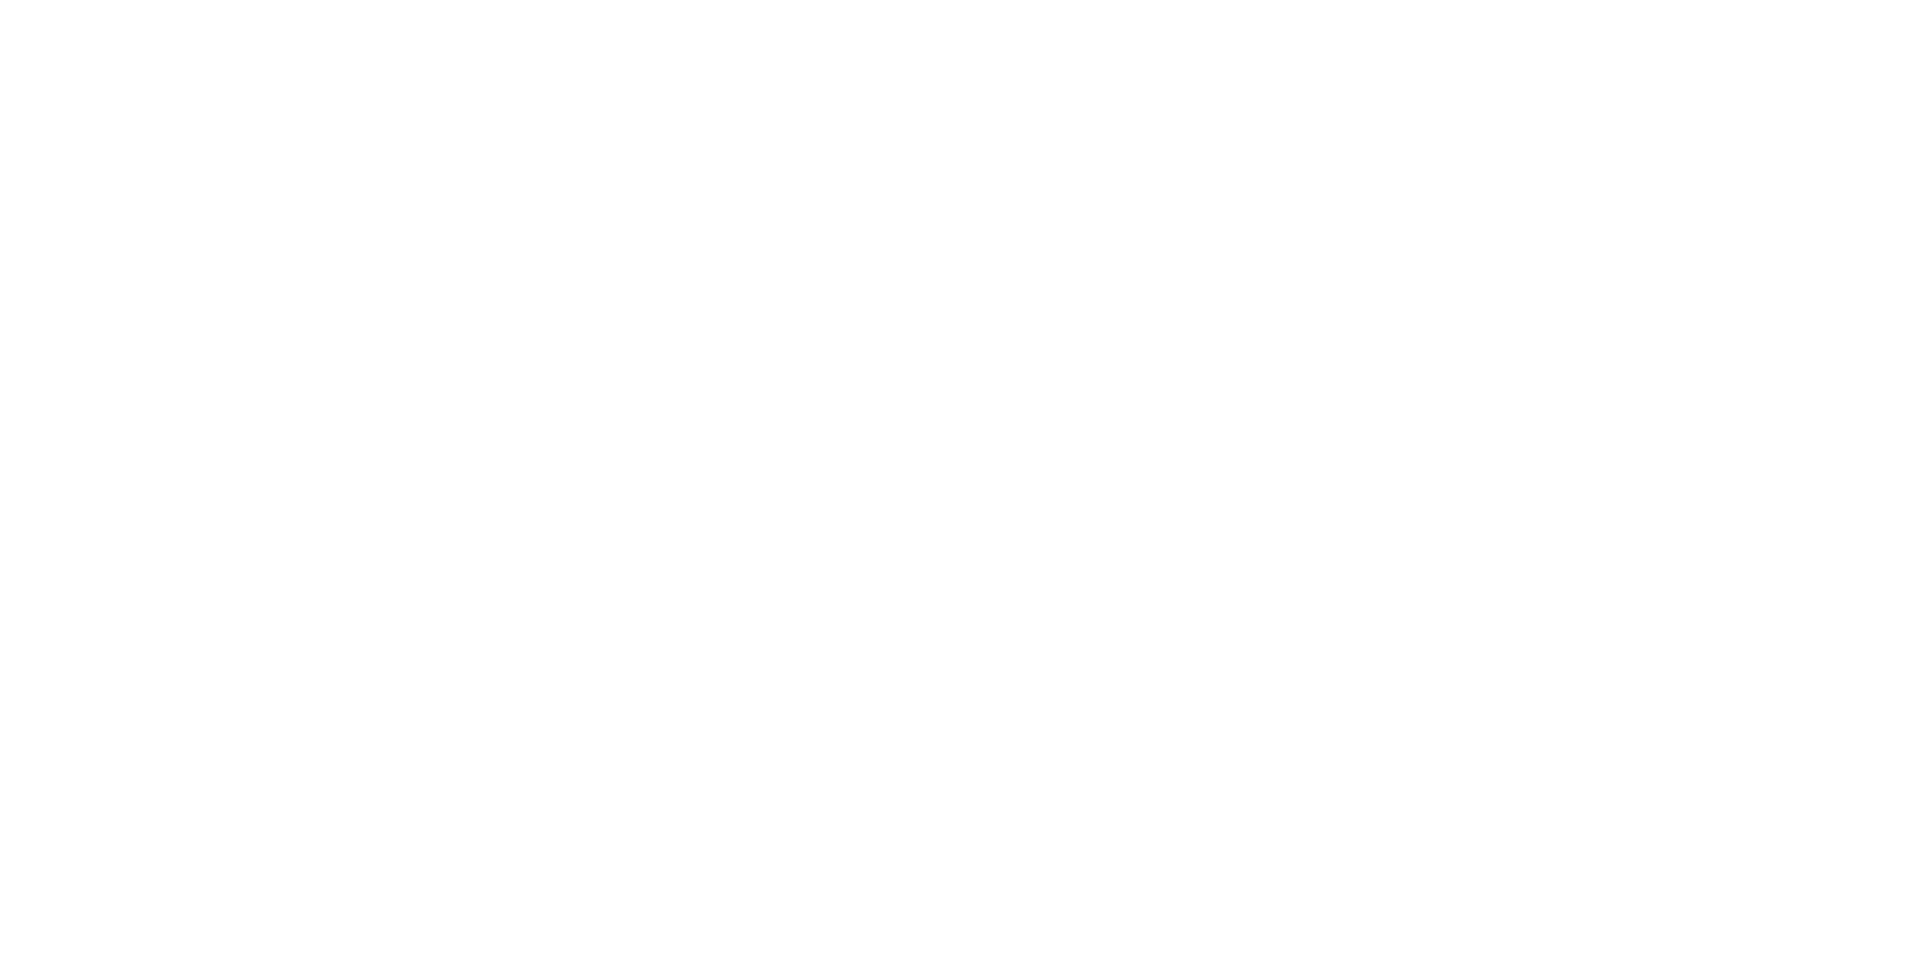 A black and white image of the city media logo.